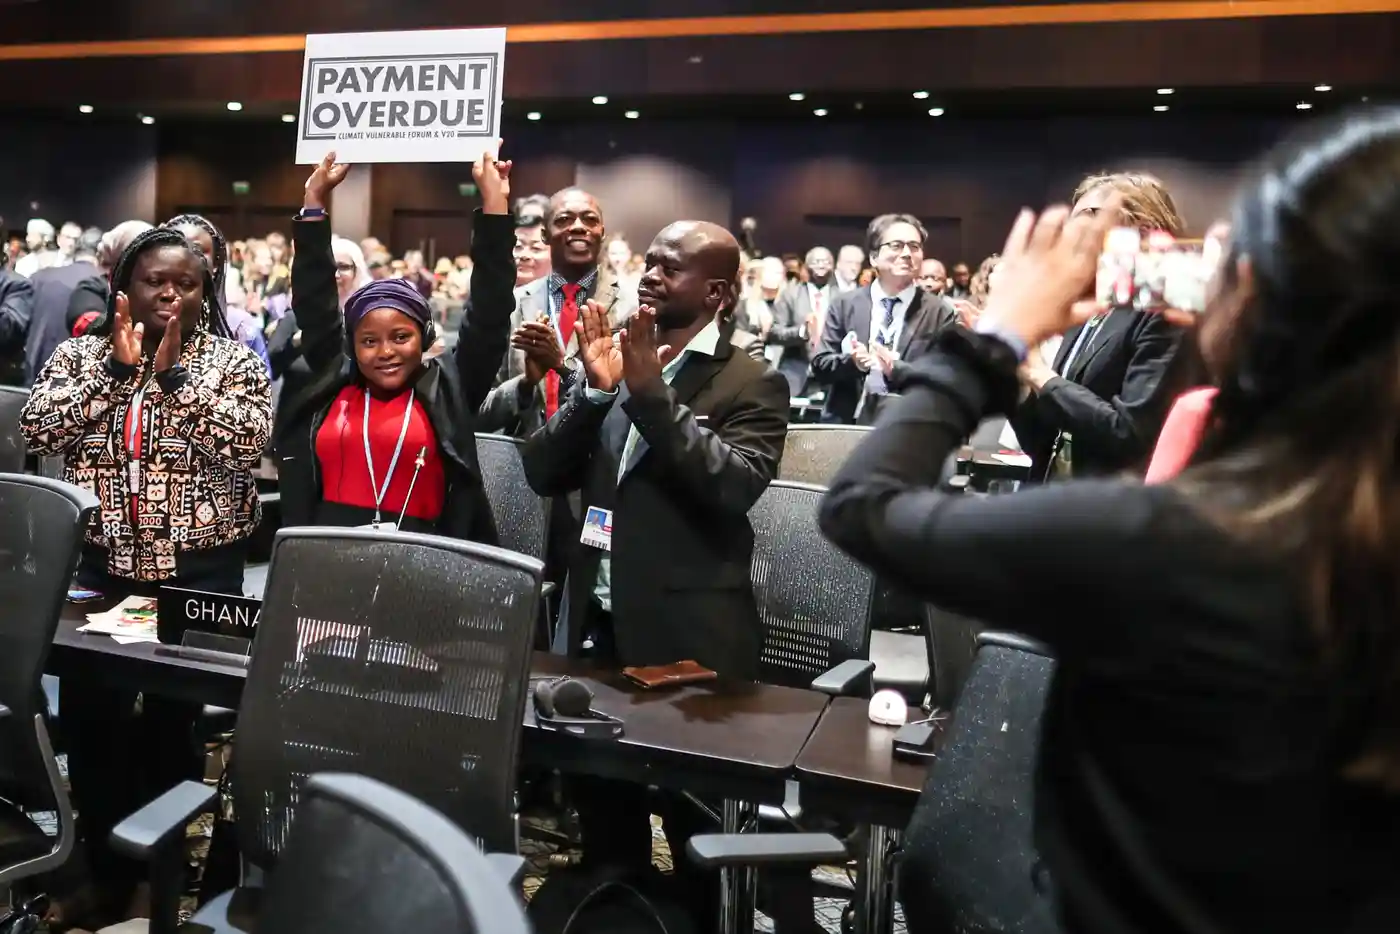 Nakeeyat Sam Dramani, a young poet from Ghana, holds a placard that reads, “Payment Overdue” after giving a speech about global warming during the COP27 U.N. Climate Summit. Photo: Sedat Suna / EPA